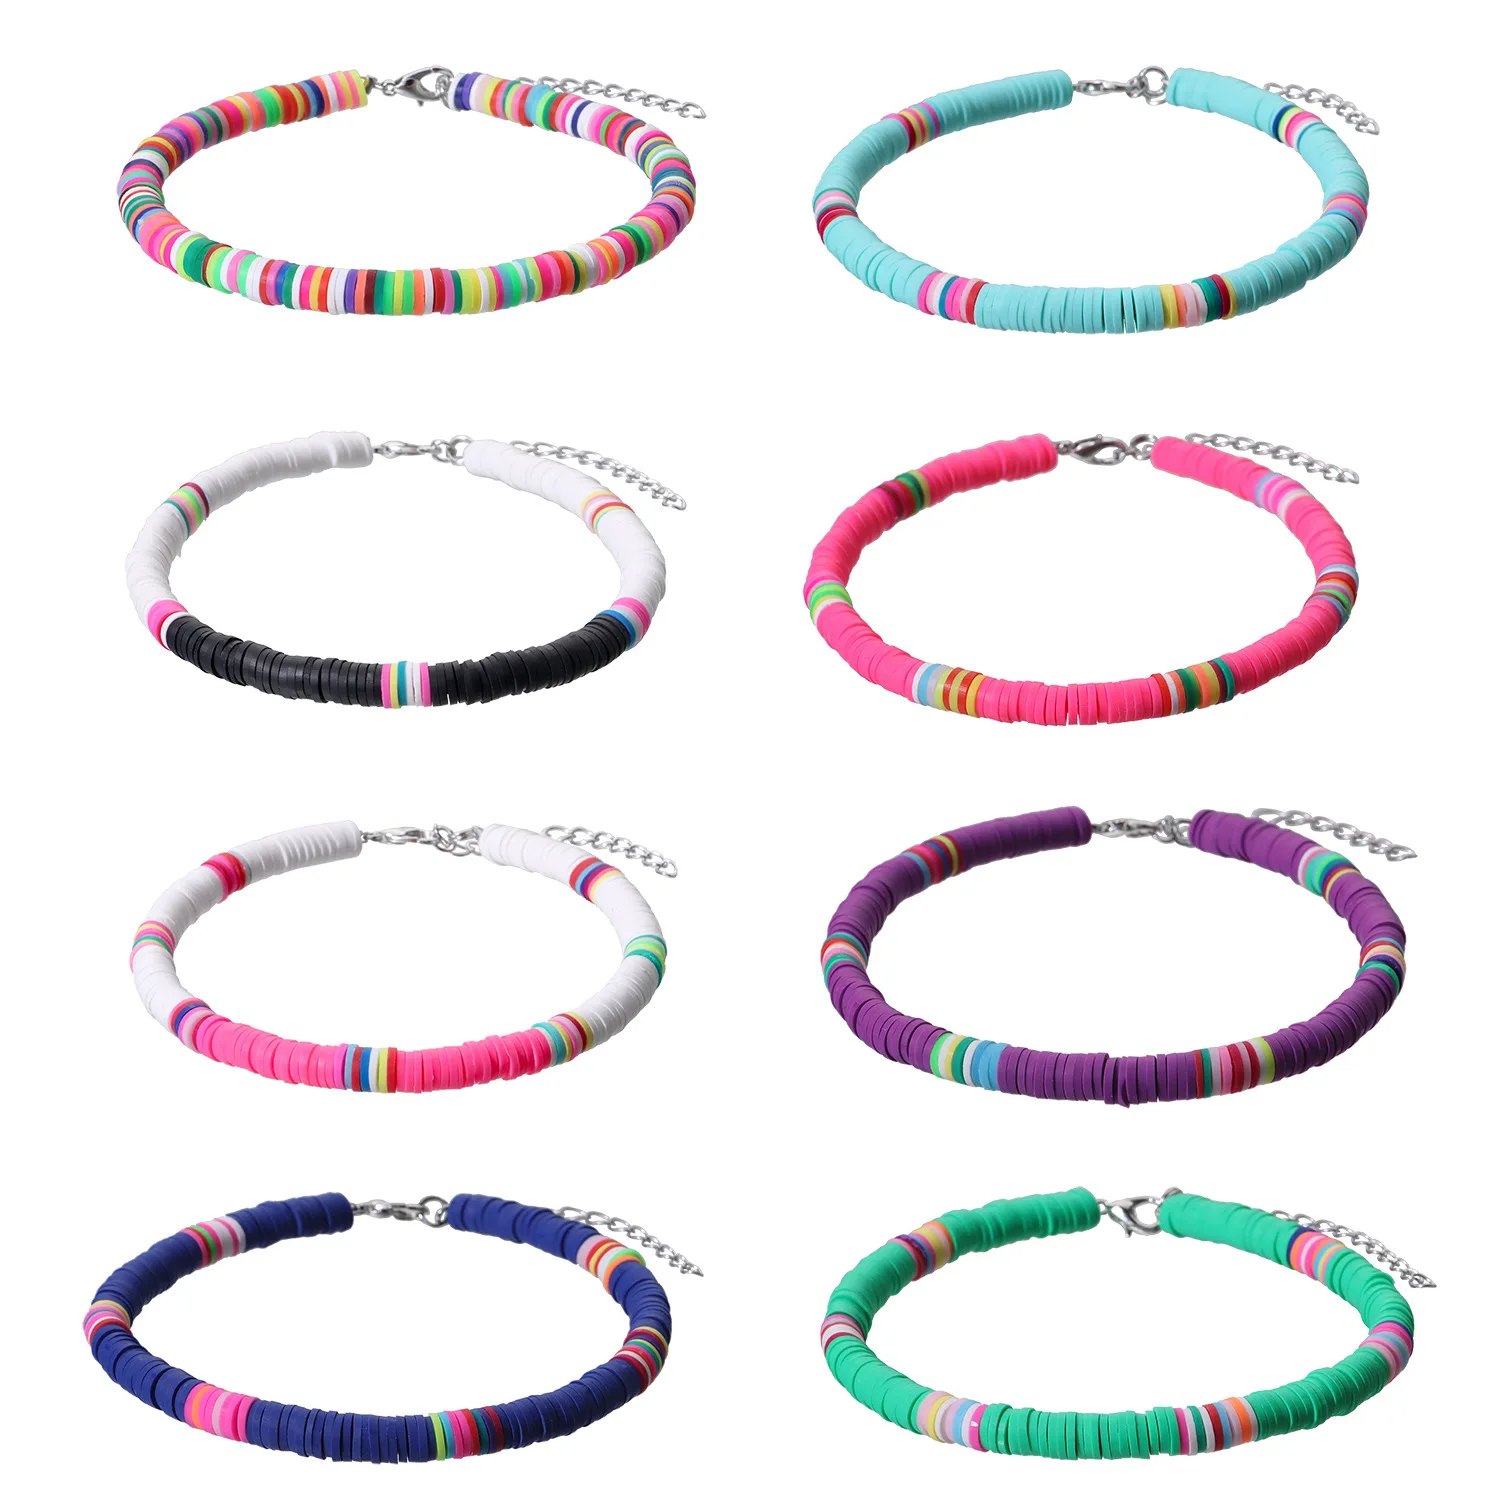 

New Colorful Soft Clay Anklets For Women 6MM Rainbow Polymer Clay Stackable Beaded Chain Ankle Bracelet Boho Beach Jewelry